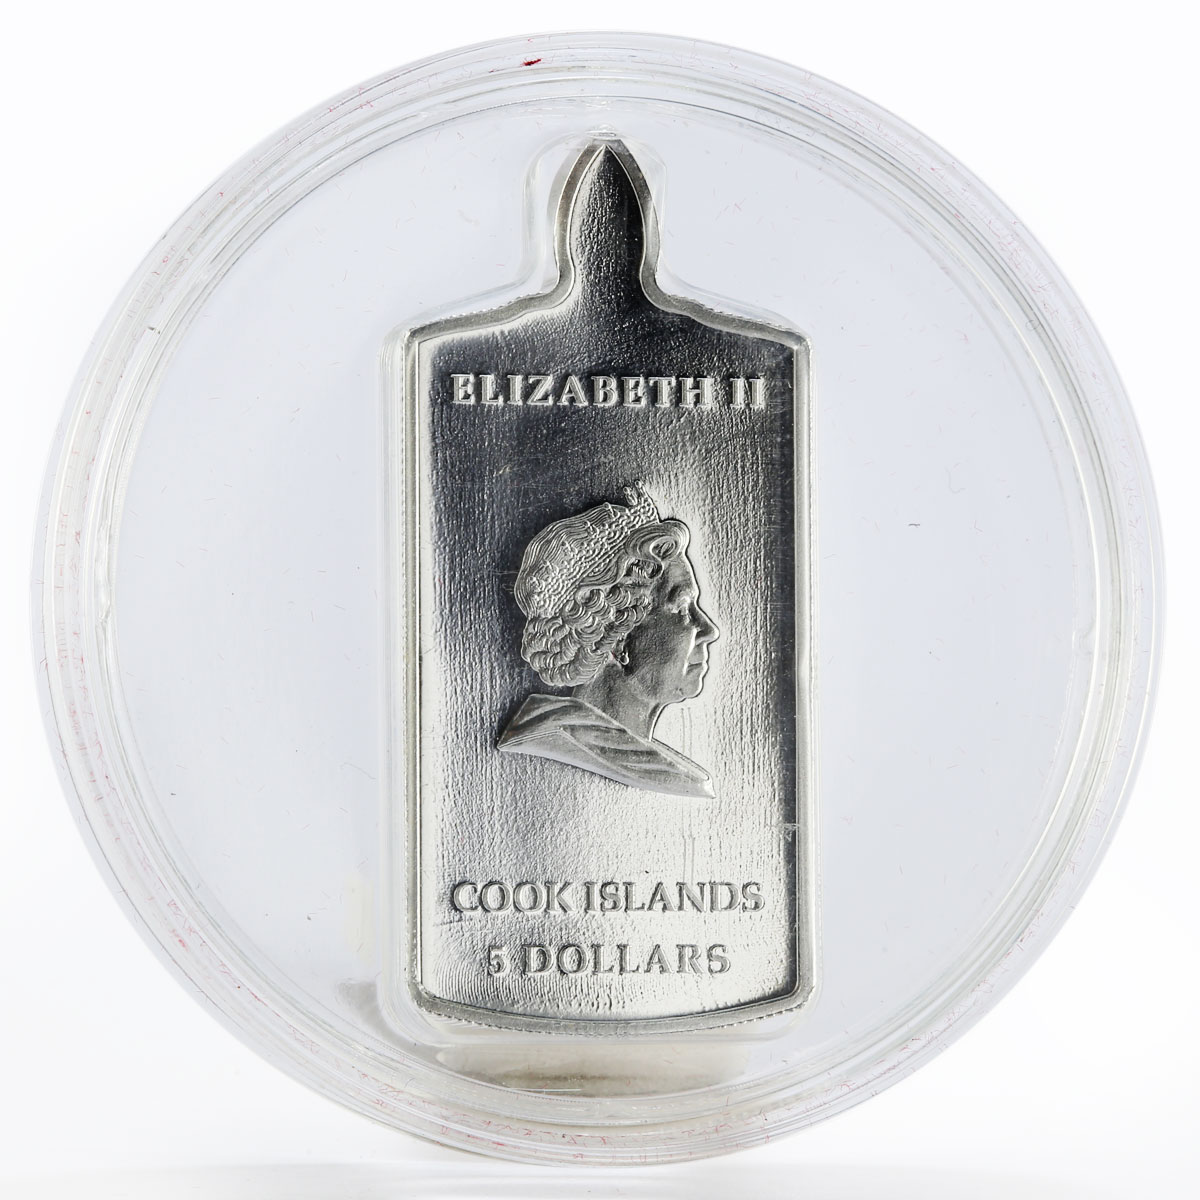 Cook Island 5 dollars Polish Icon gilted crystal proof silver coin 2006